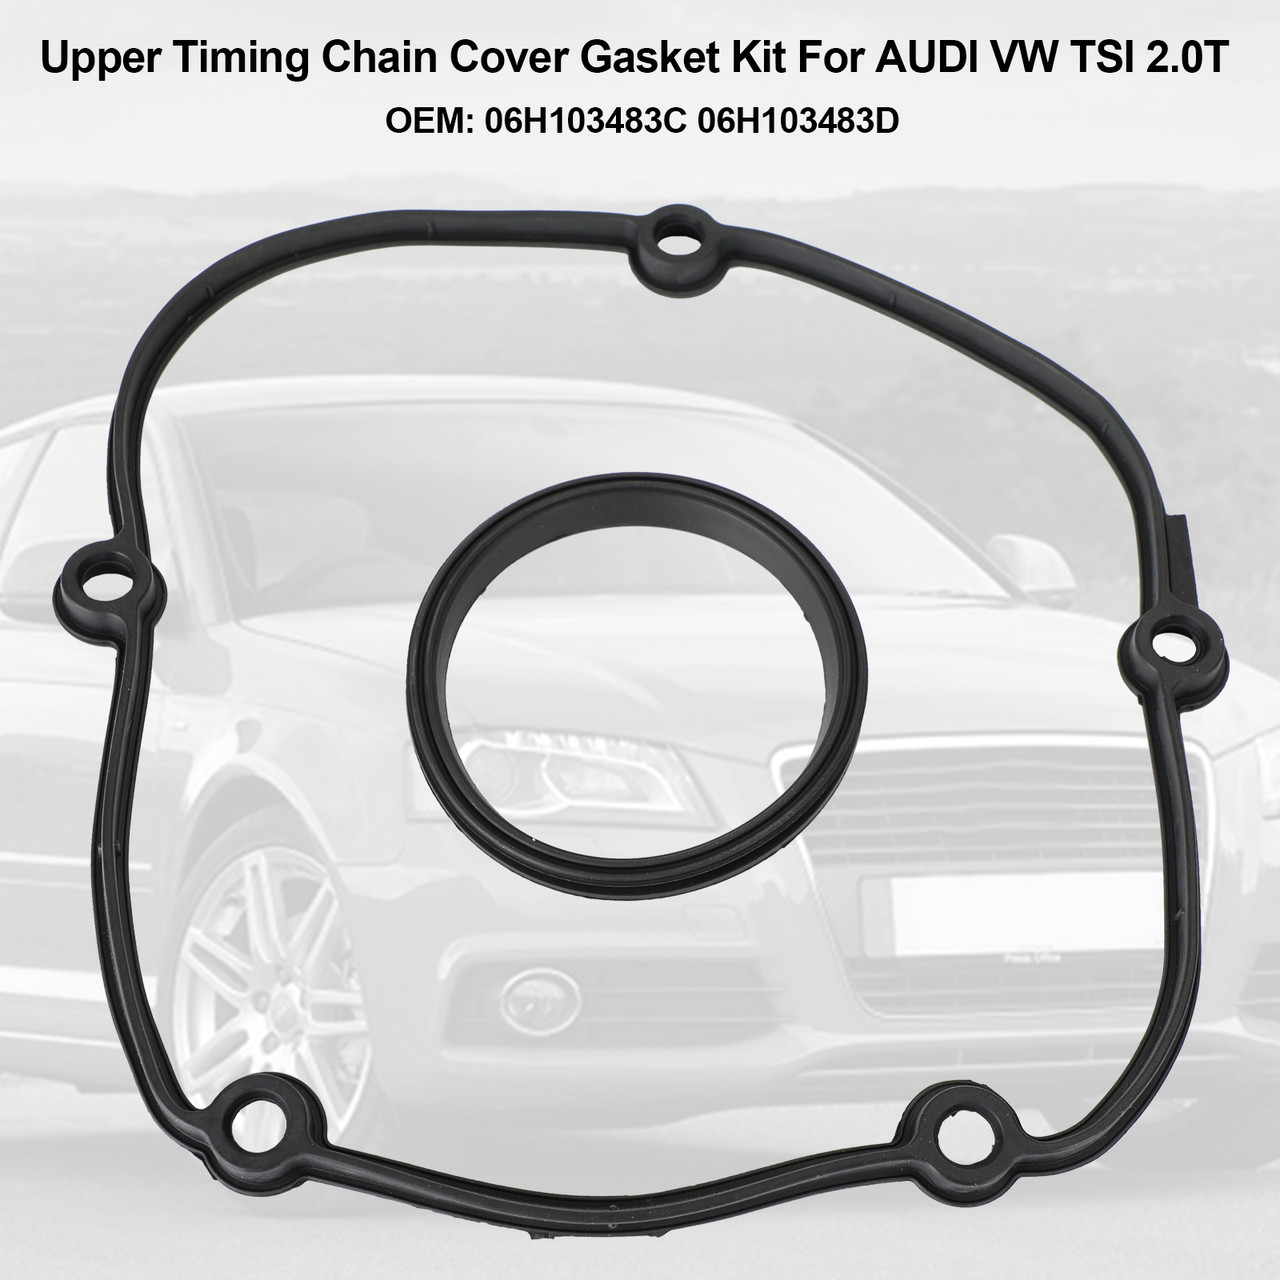 Upper Timing Chain Cover Gasket Kit For VW TSI 2.0T 06H103483C 06H103483D